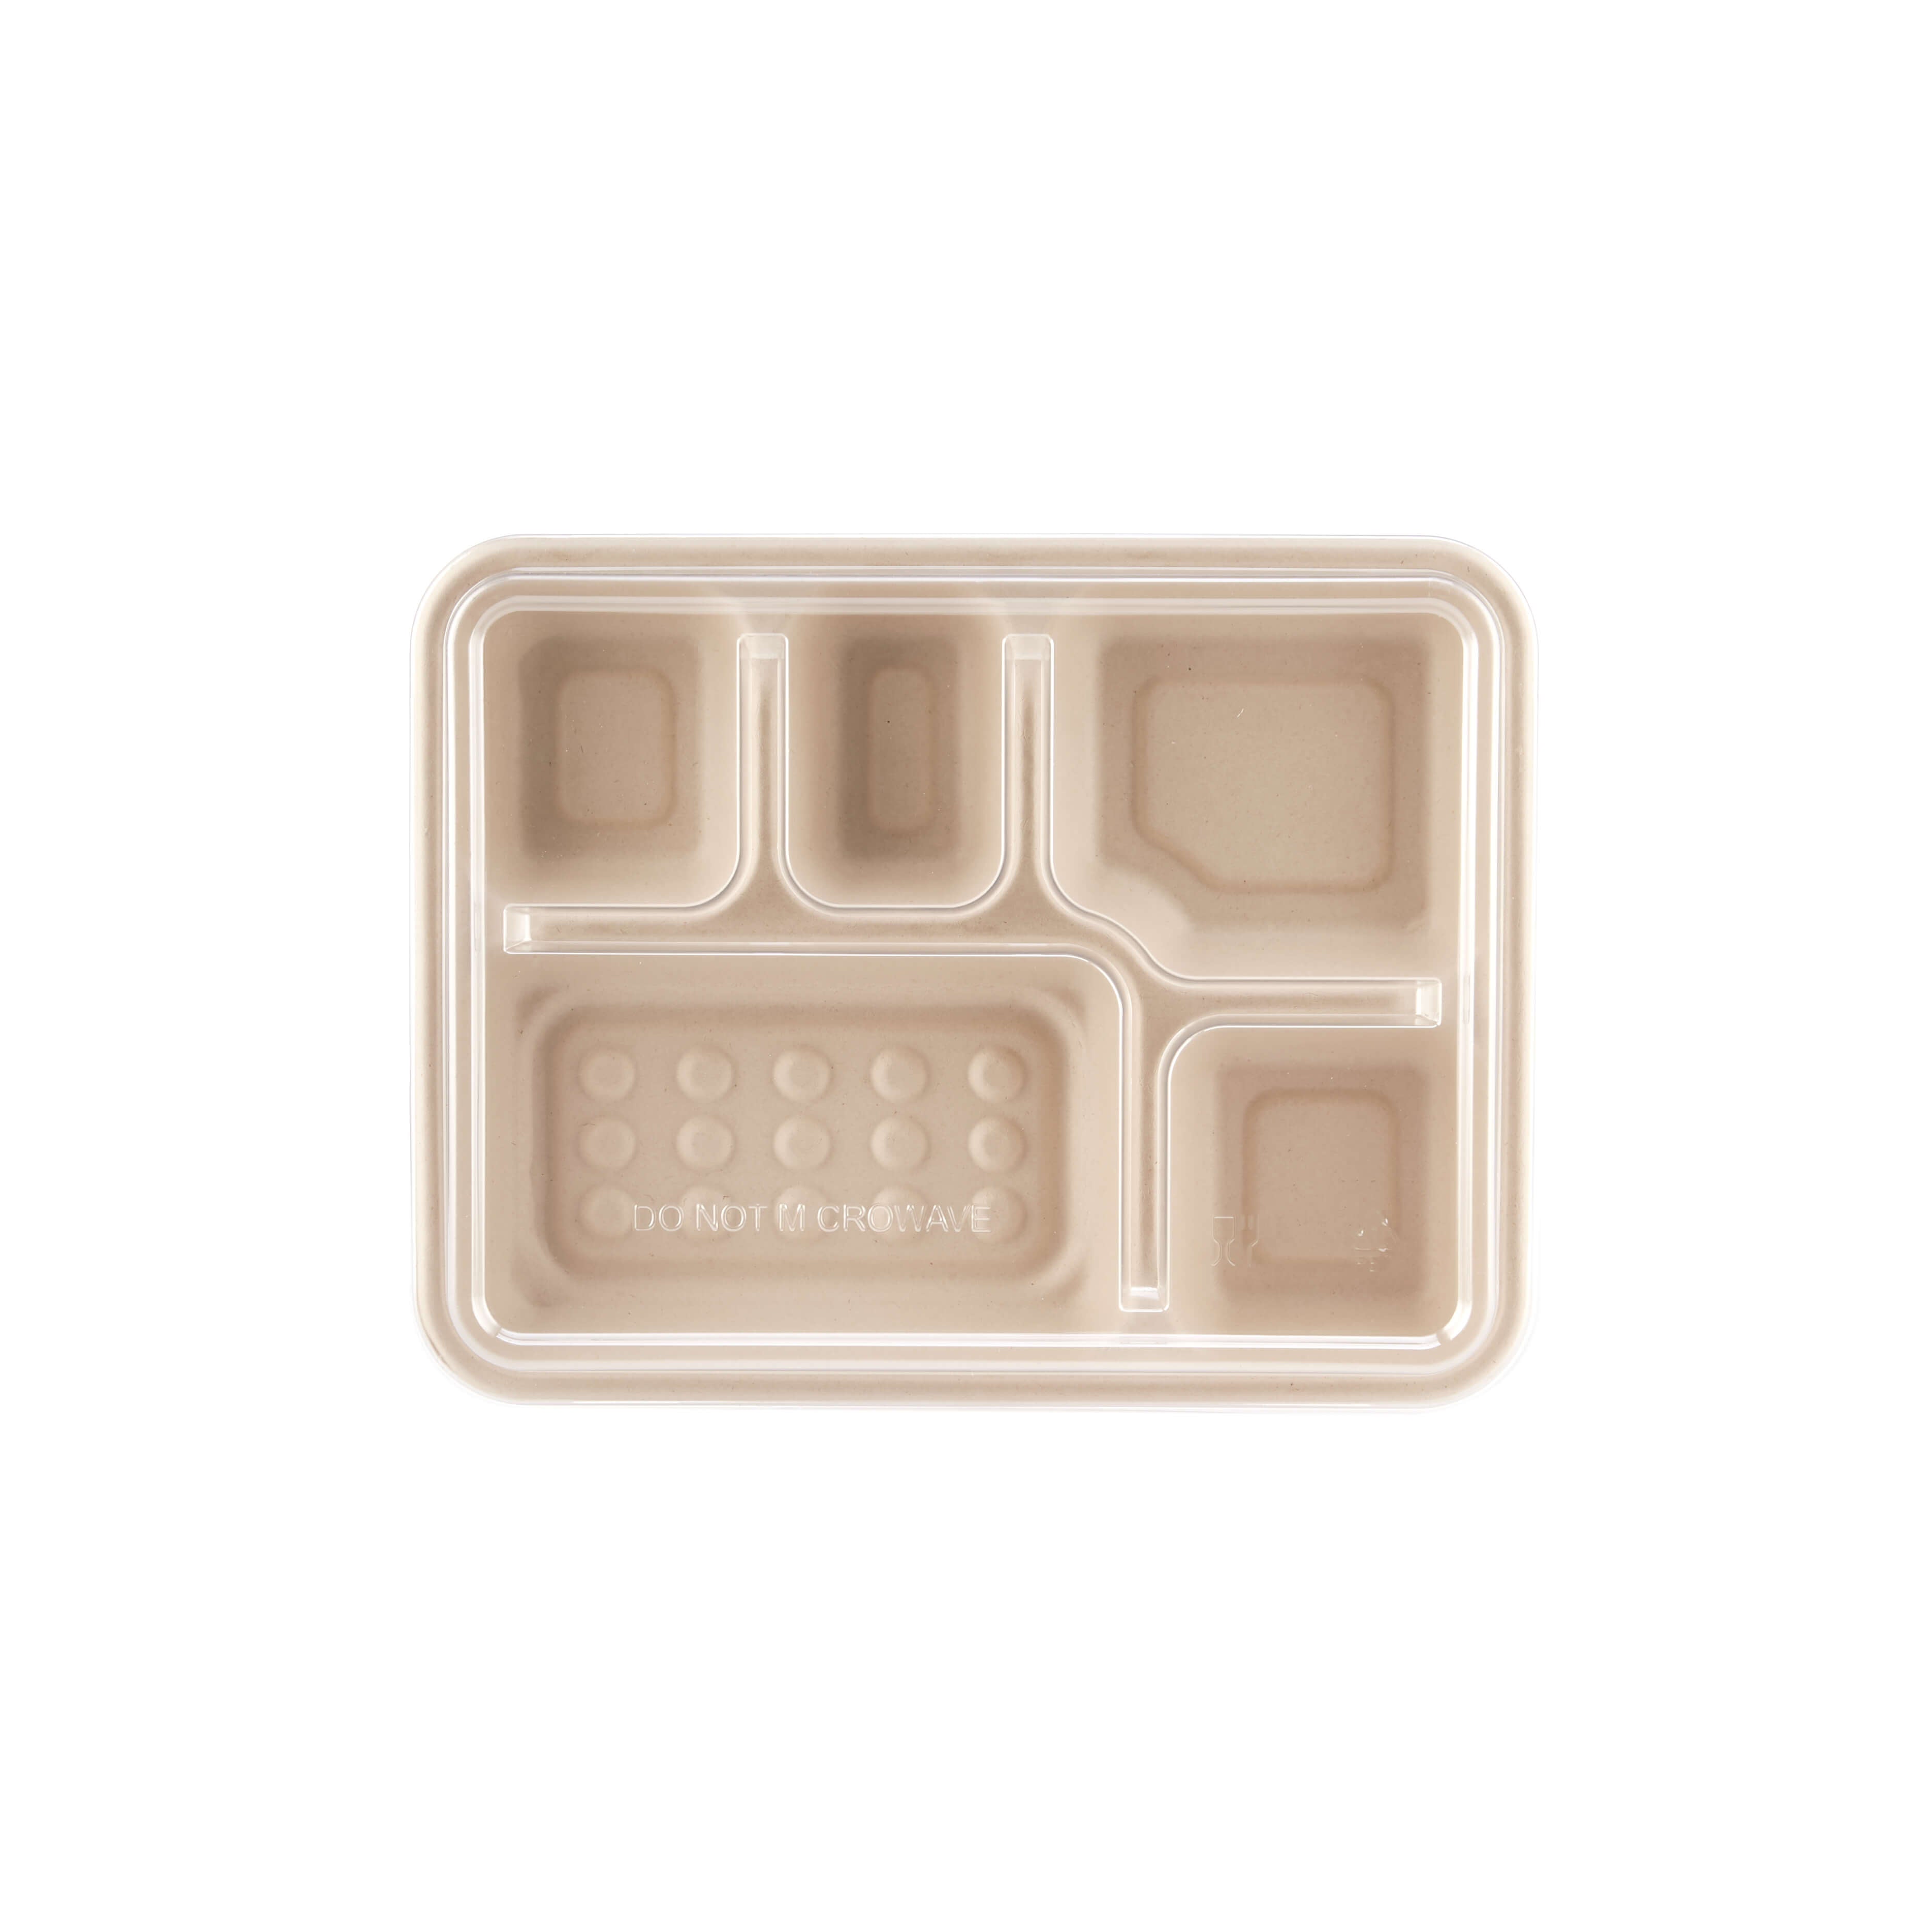 Bio Degradable 5 Compartment Deep Tray  - Hotpack Global